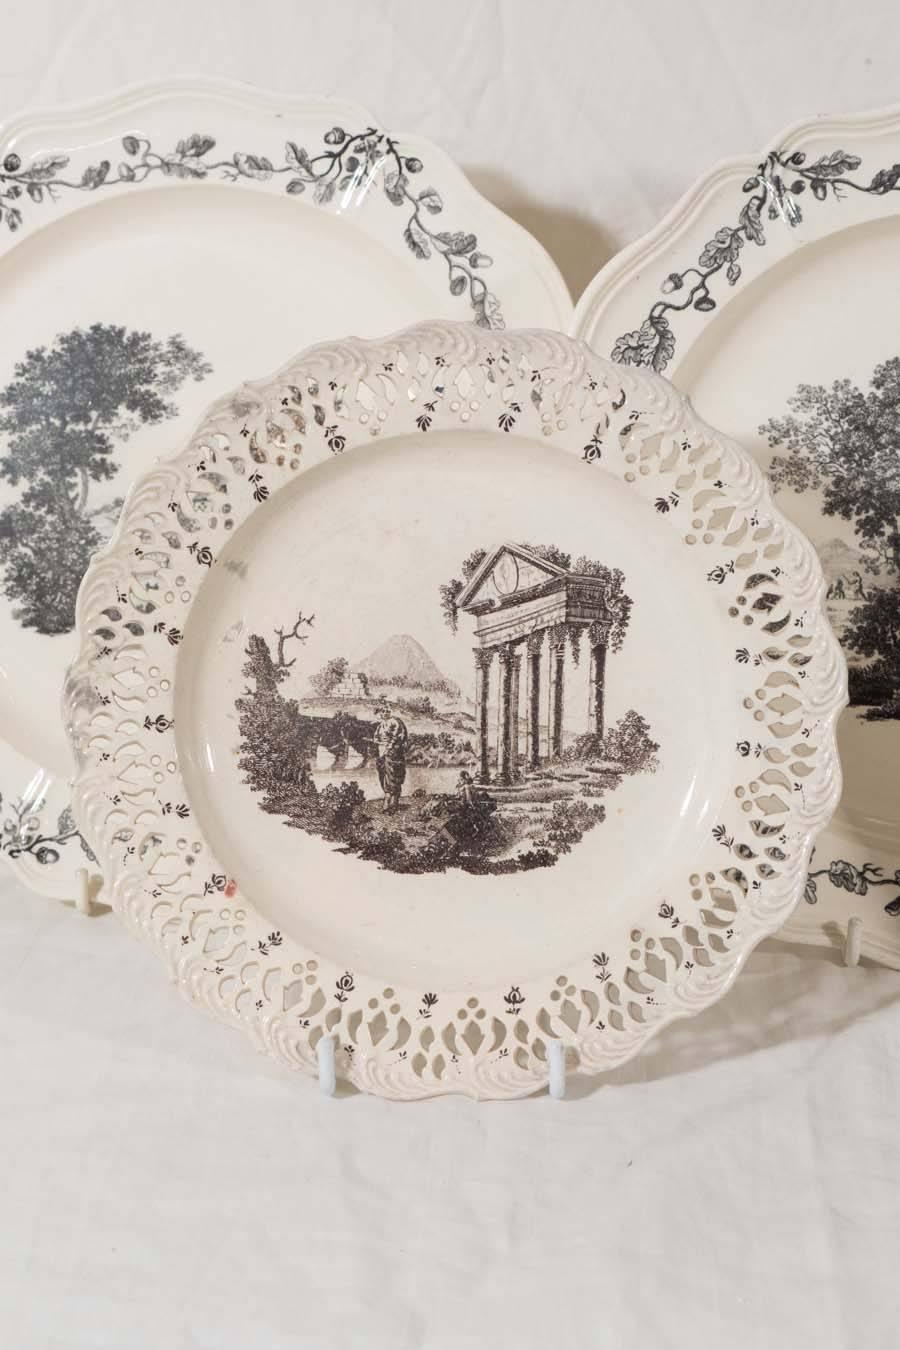 A group of five Wedgwood 18th century creamware dishes. The three larger dishes each decorated with a central scene showing a landscape and a border of acorns and oak leaves. The rustic scenes depict rural life showing fishing and farming. Printed